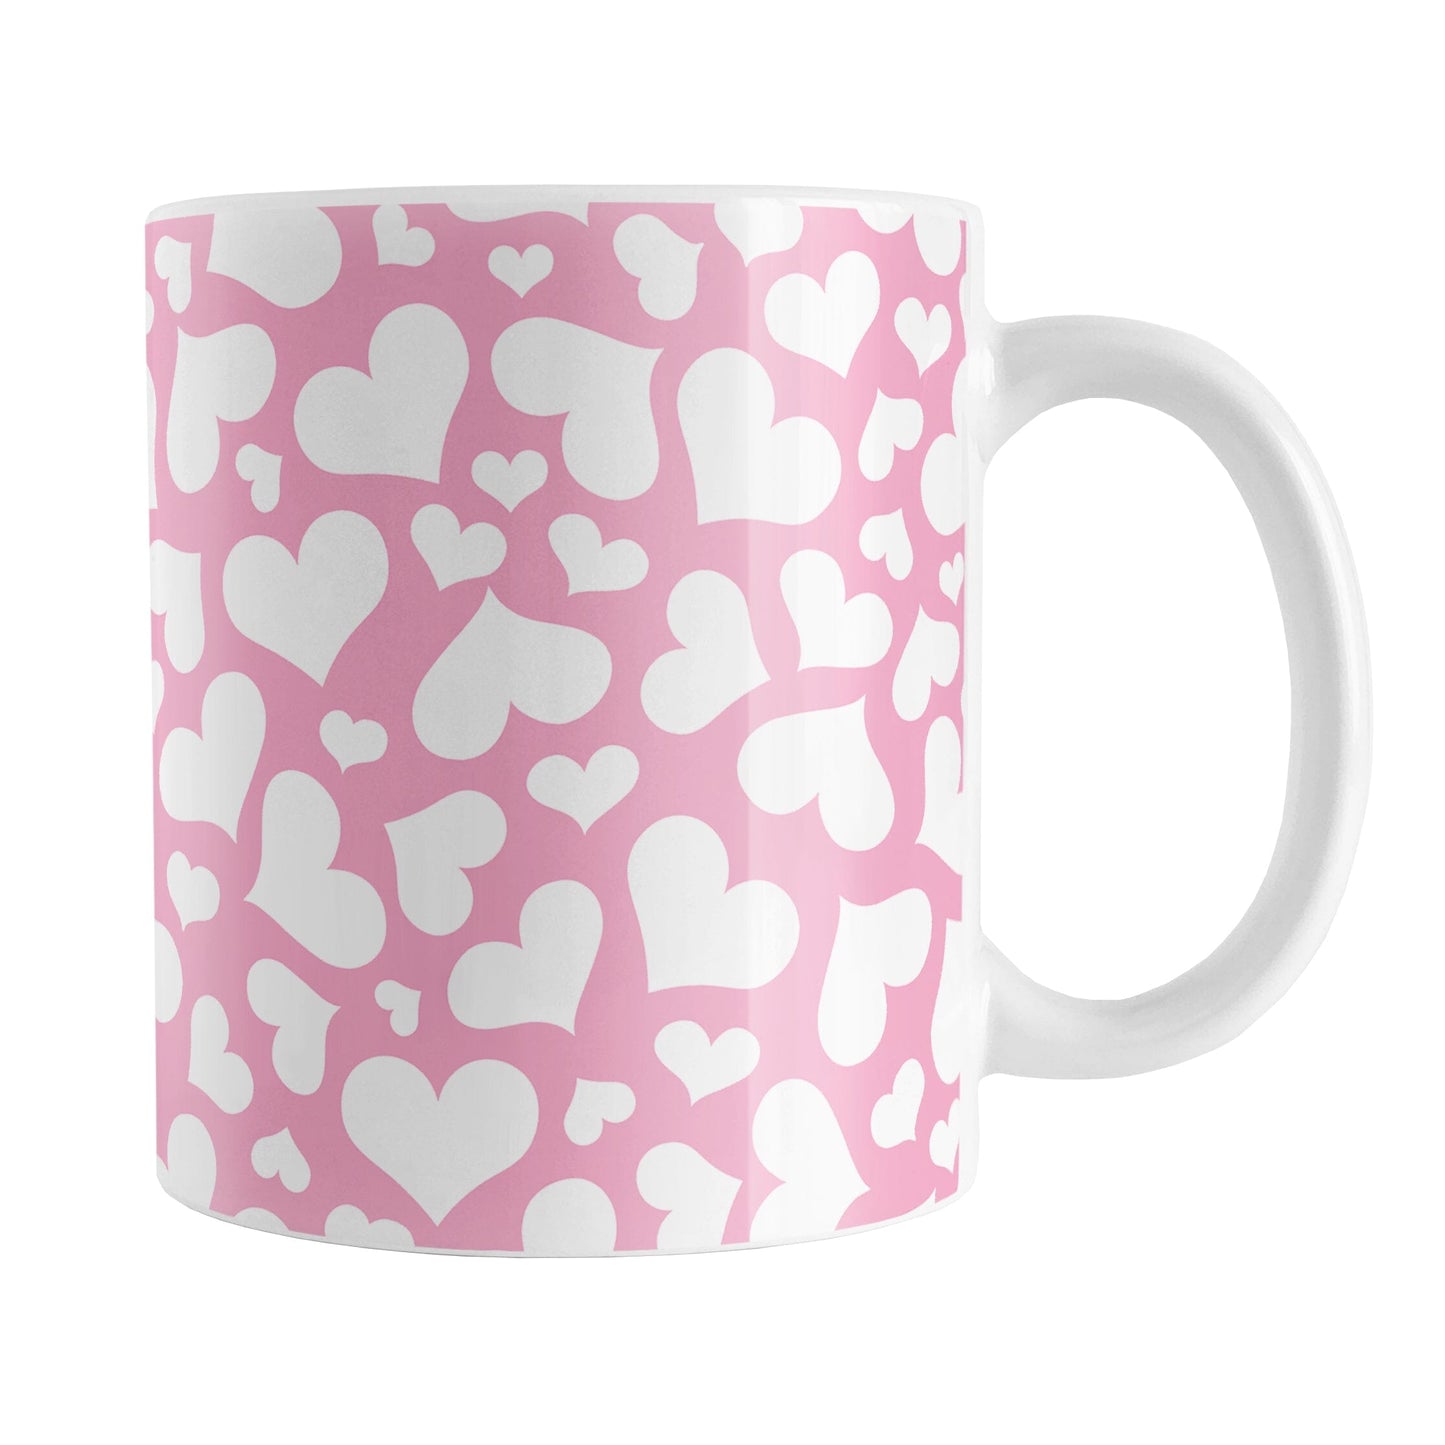 Cute White Hearts on Pink Mug (11oz) at Amy's Coffee Mugs. A ceramic coffee mug designed with a multi-directional pattern of cute white hearts over a pink background color that wraps around the mug to the handle.